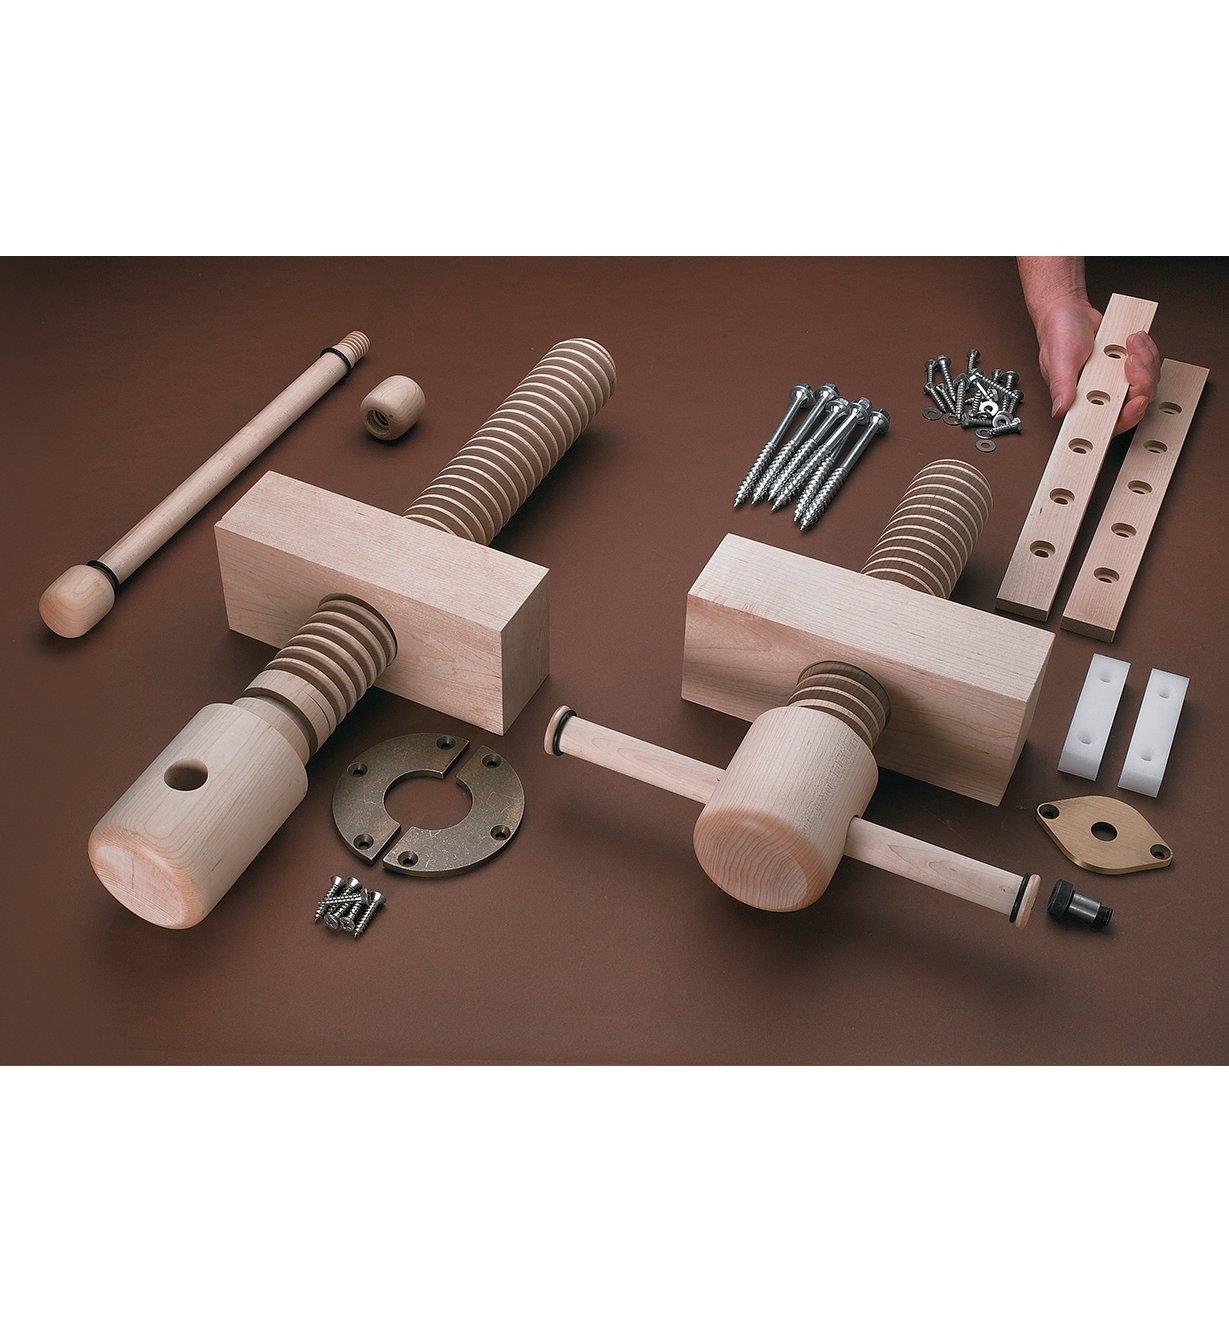 Wooden Vise Kits by Lake Erie Toolworks